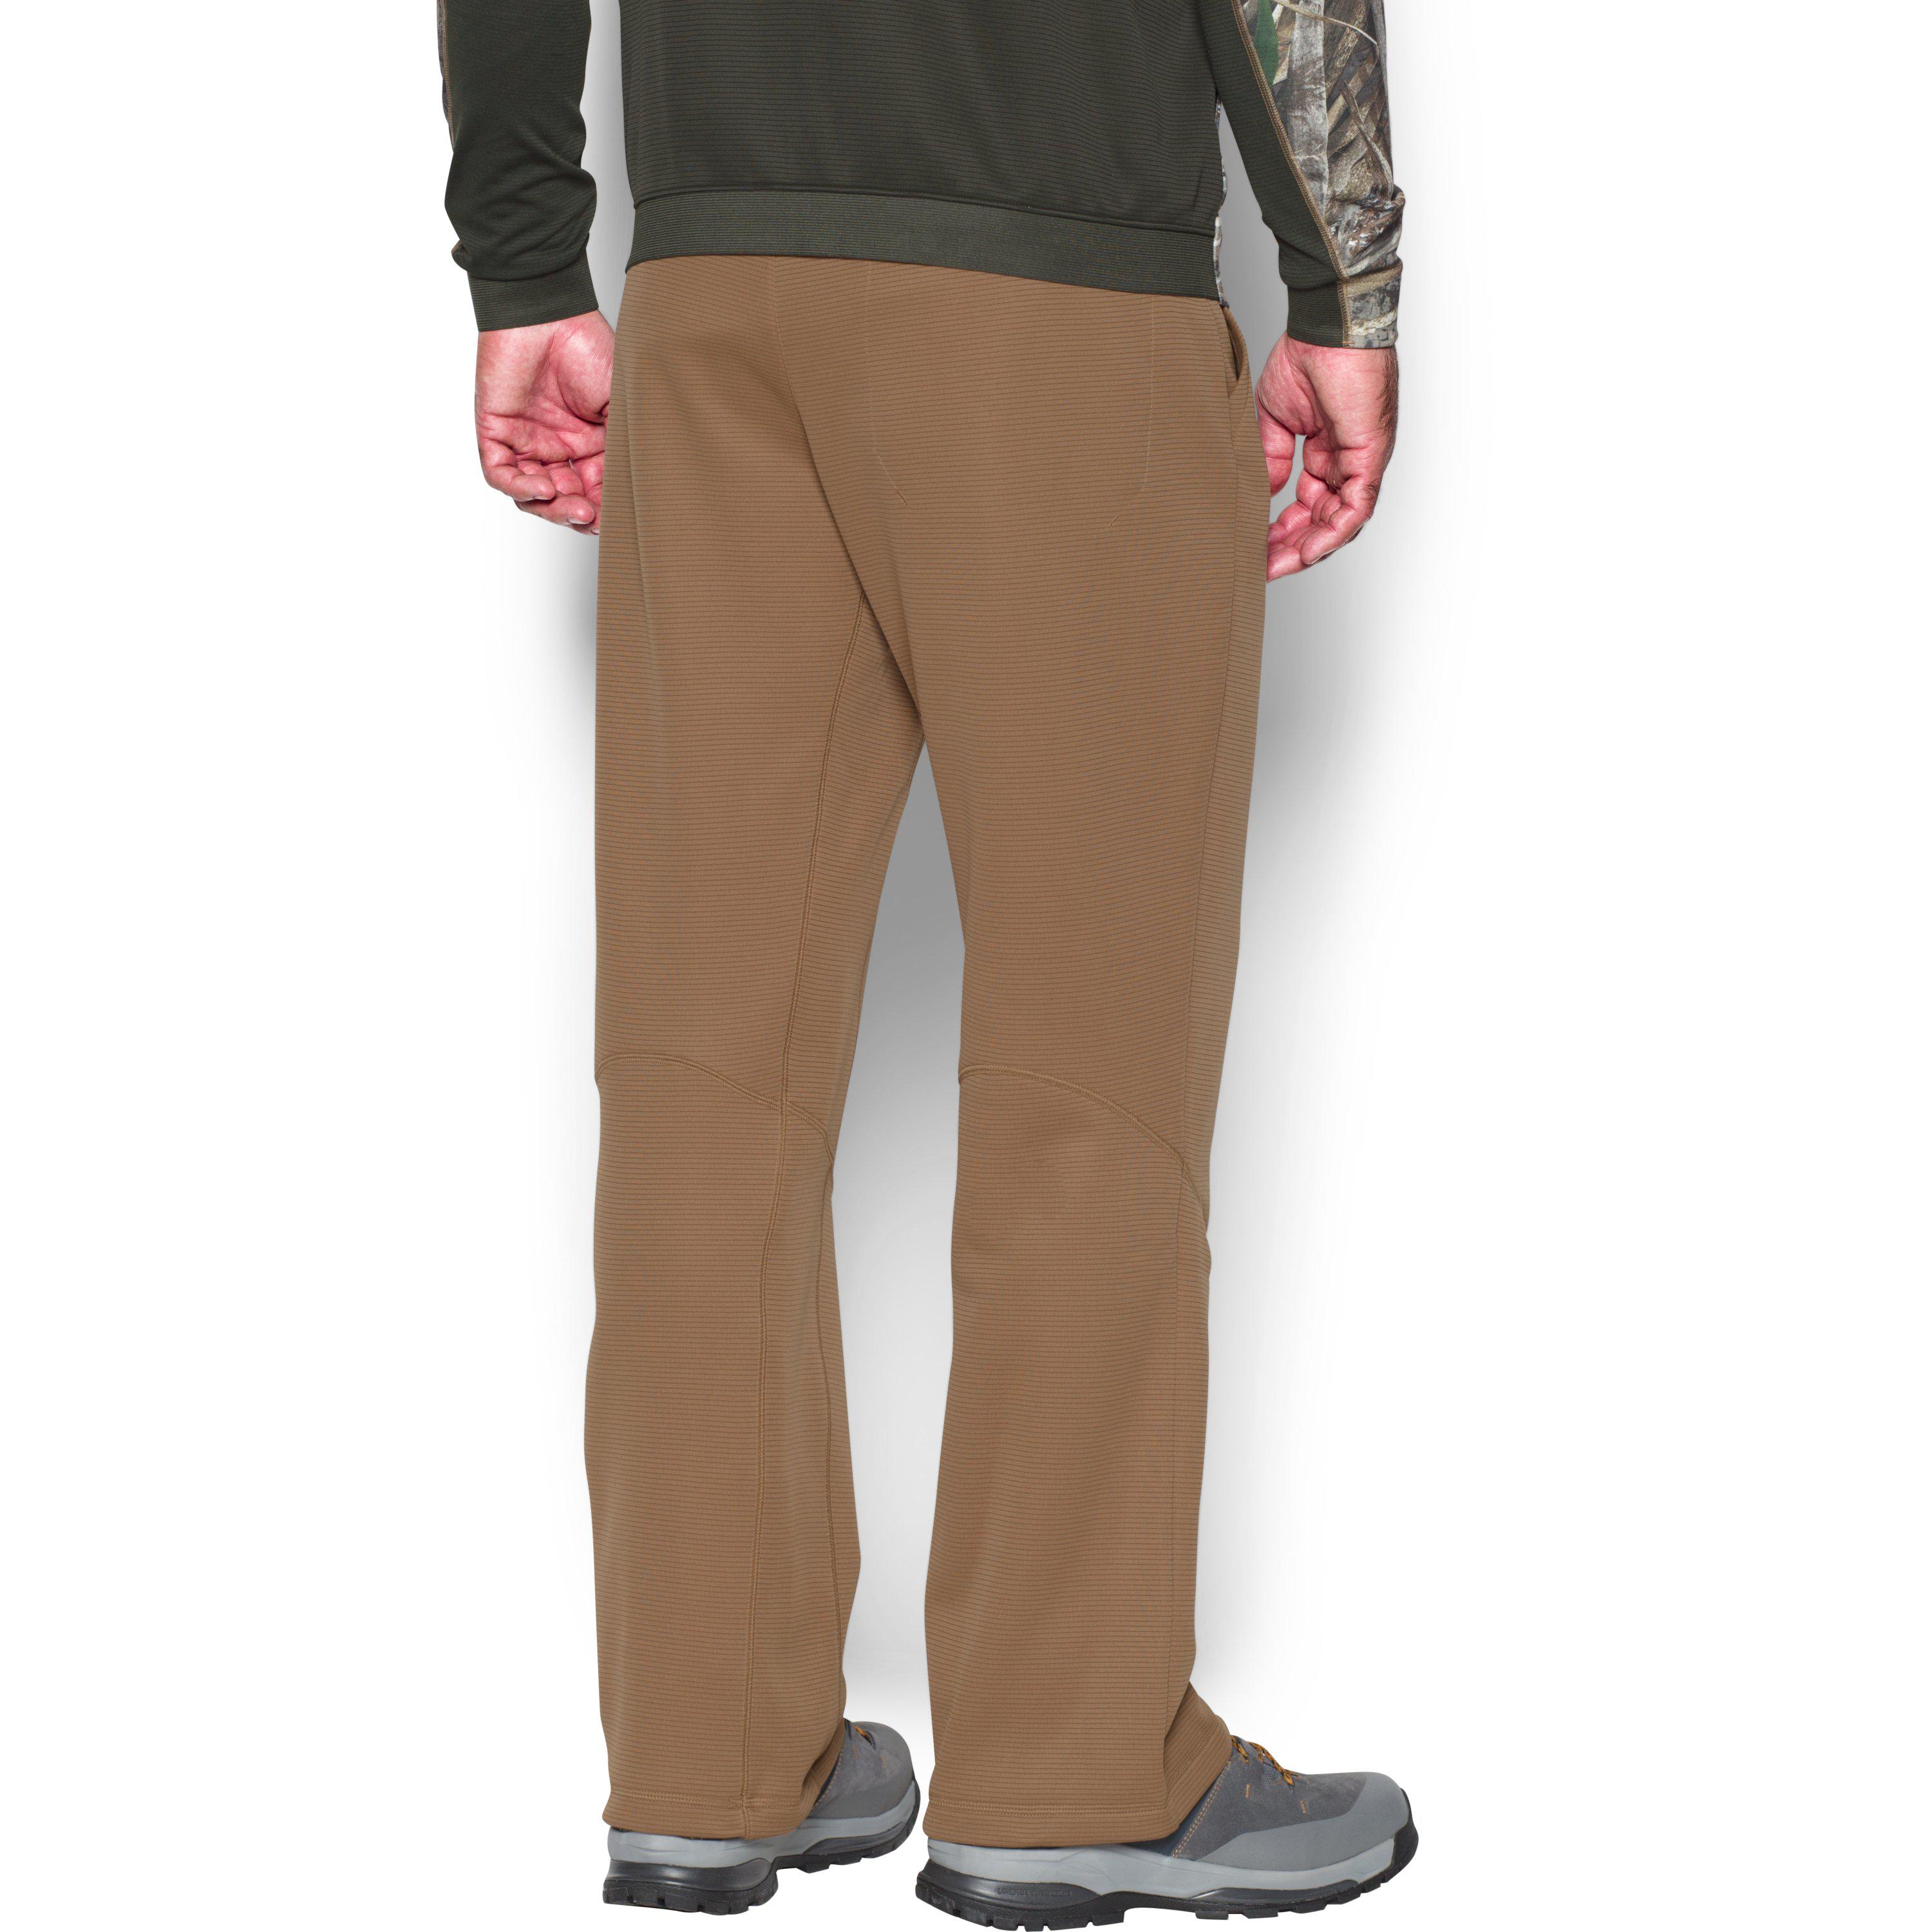 under armour wader pants